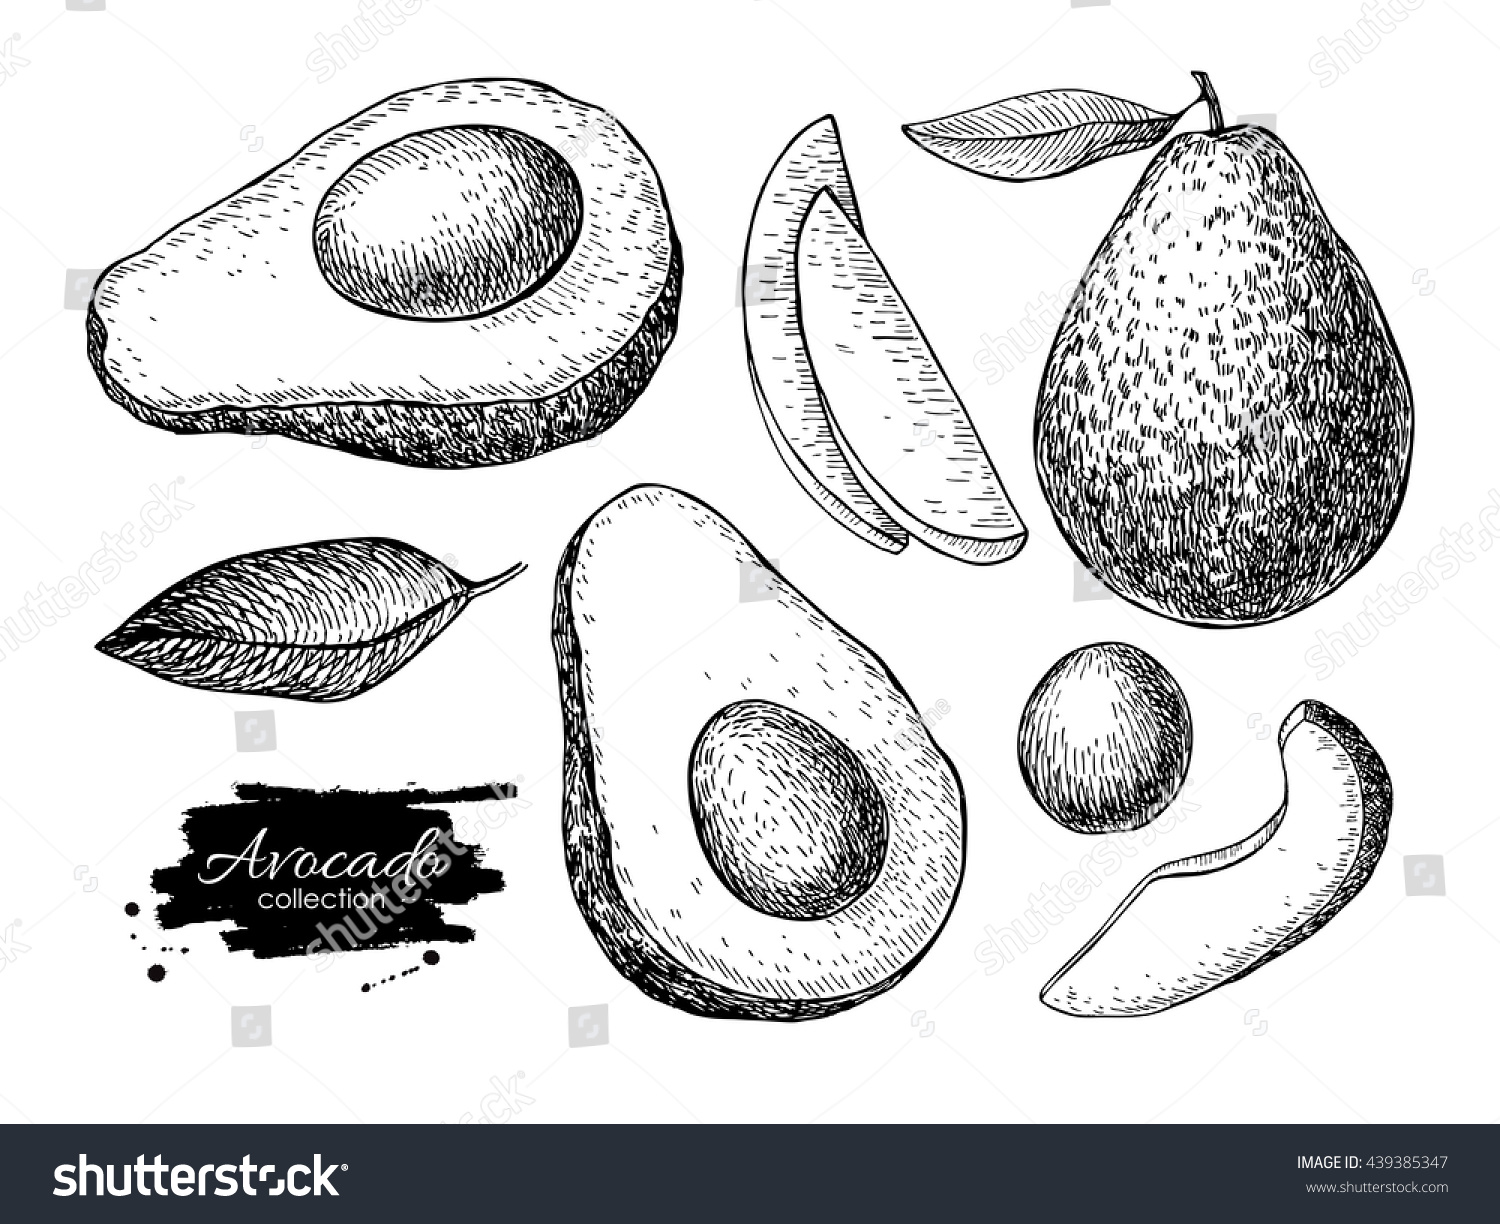 Vector hand drawn avocado set. Whole avocado, sliced pieces, half, leaf and seed sketch. Tropical summer fruit engraved style illustration. Detailed food drawing. Great for label, poster, print #439385347